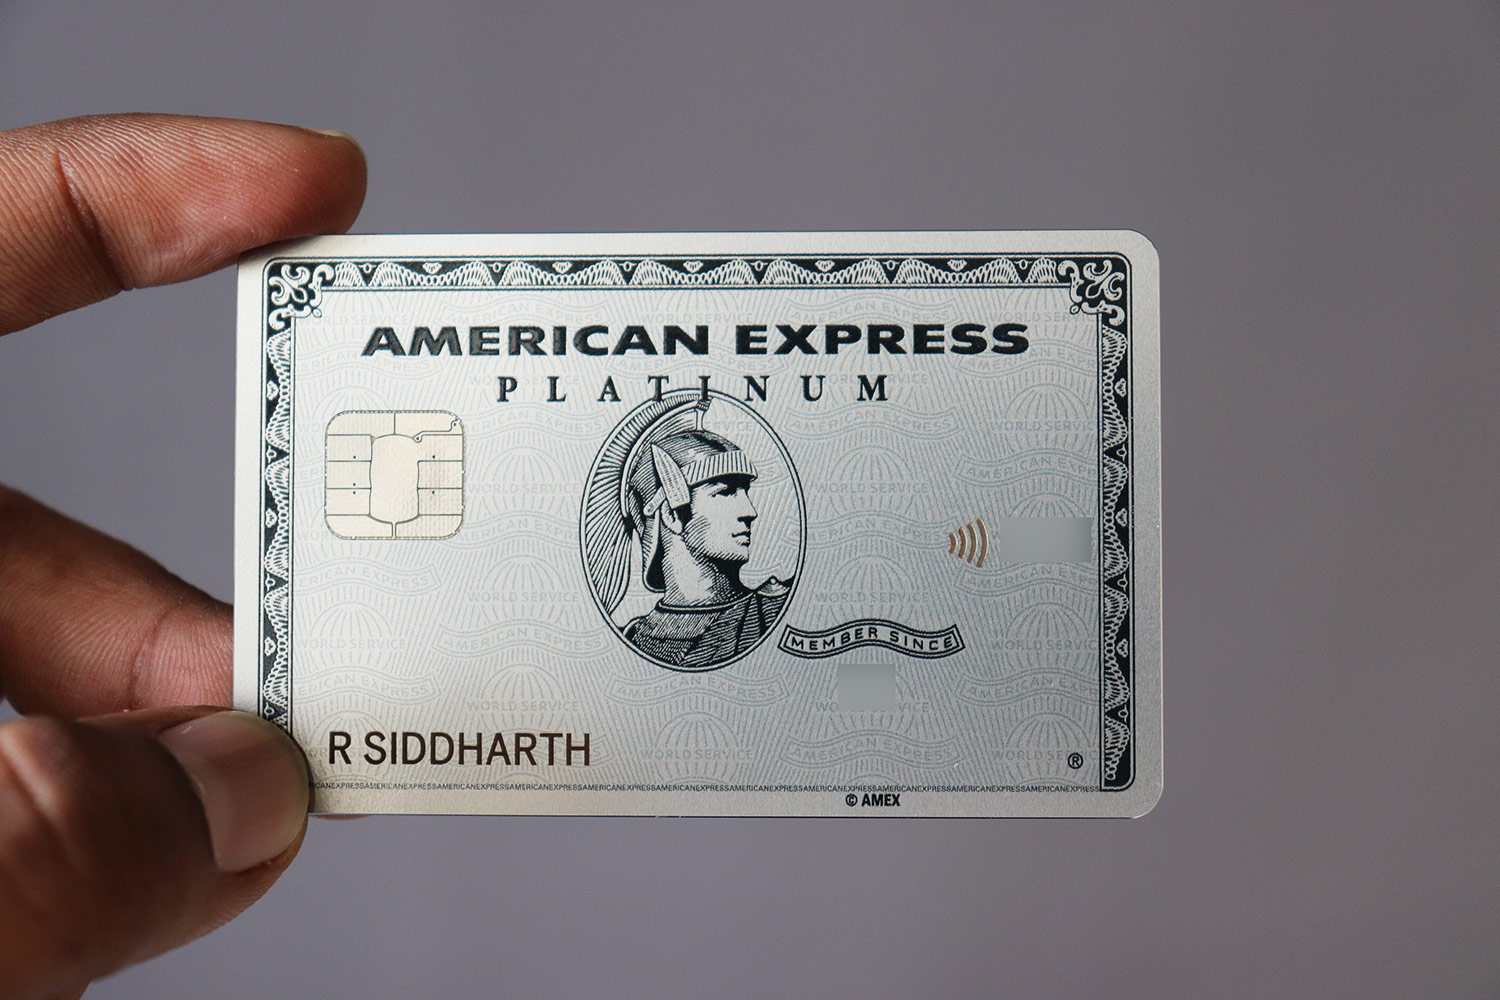 American Express Gold Charge Card Review – CardExpert